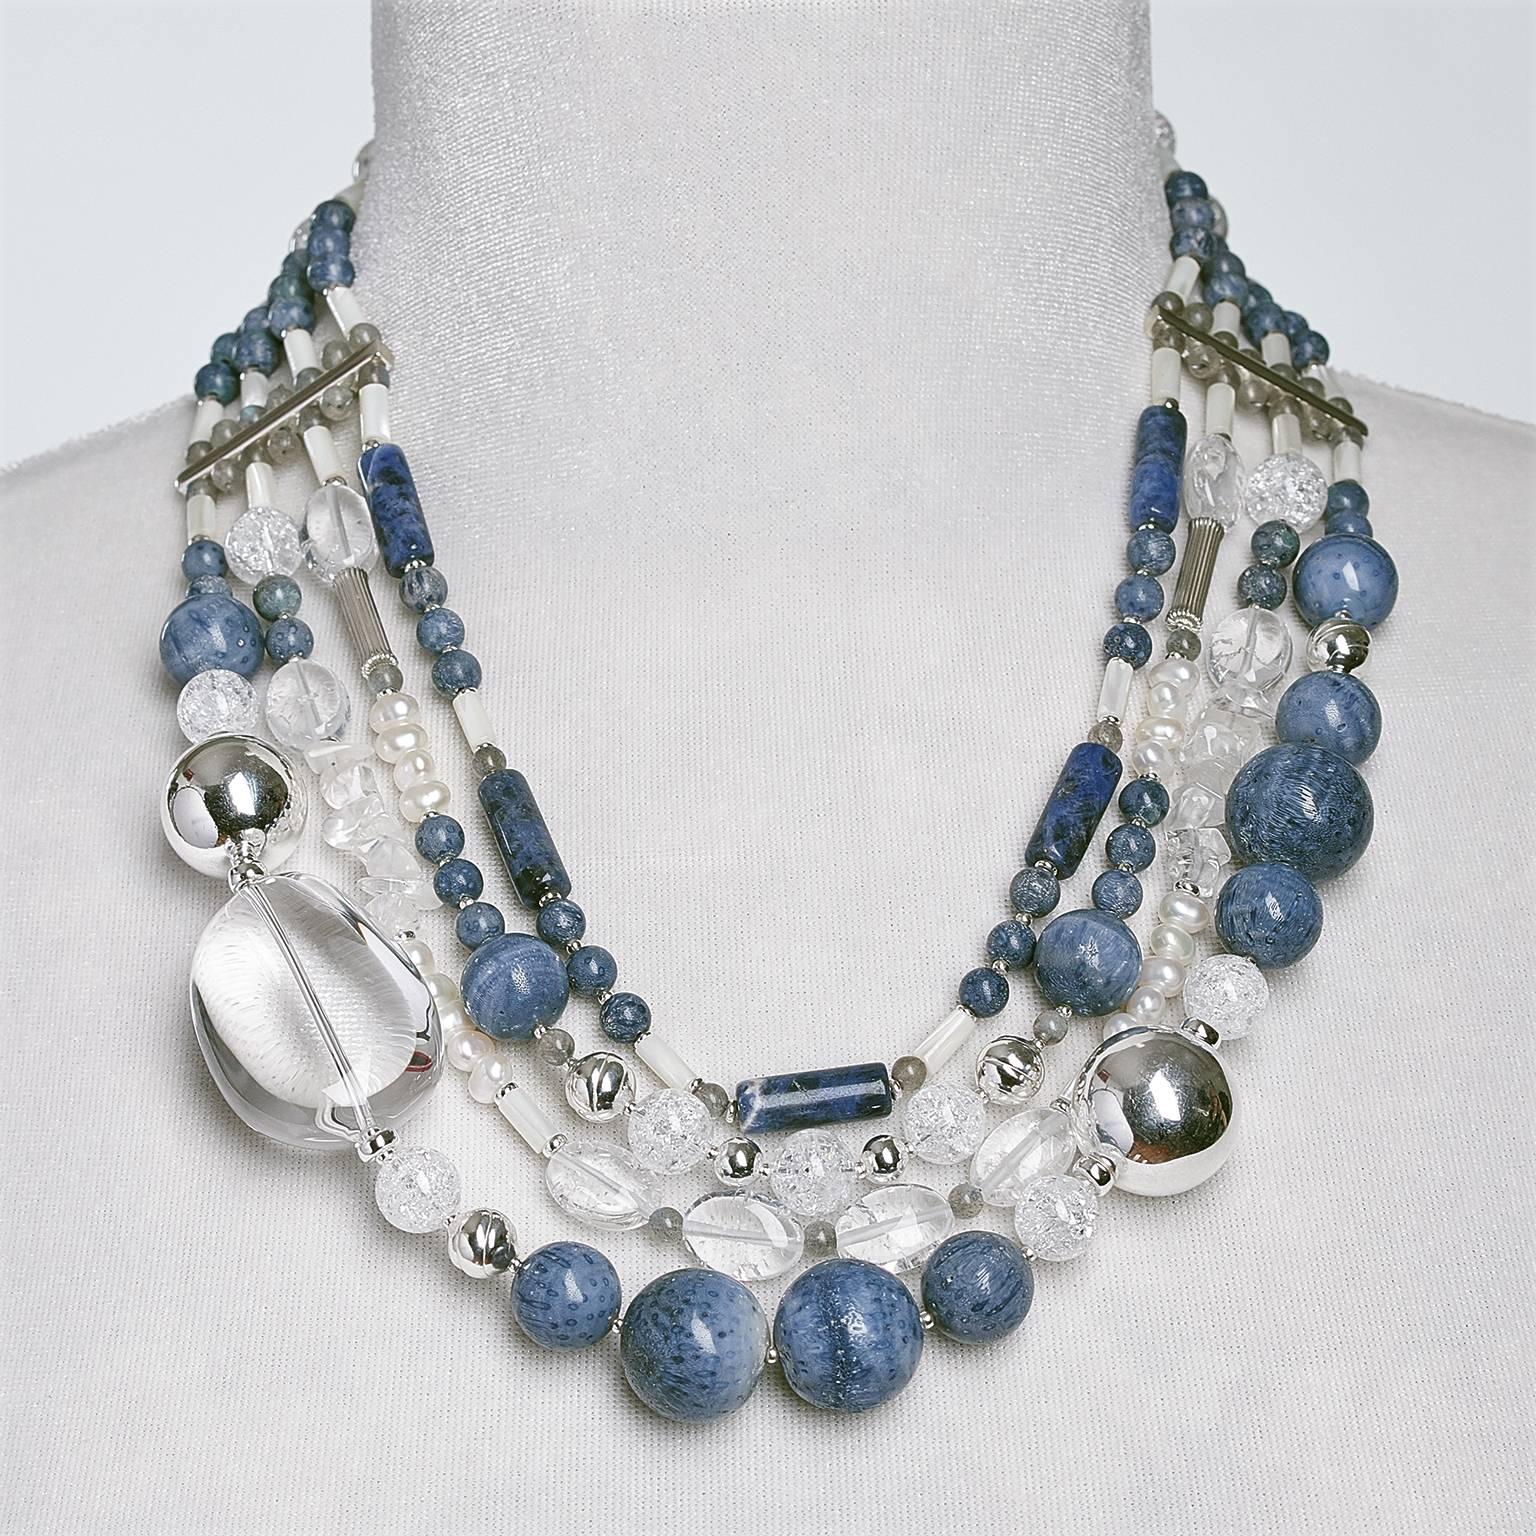 Composed with normal, very light irregularities caused by the natural structure of the Blue Sponge Coral round beads. Sodalite and Mother of Pearl tubes, that contrast beautifully with the large Crystal Nugget and White Cultured Freshwater Pearls.